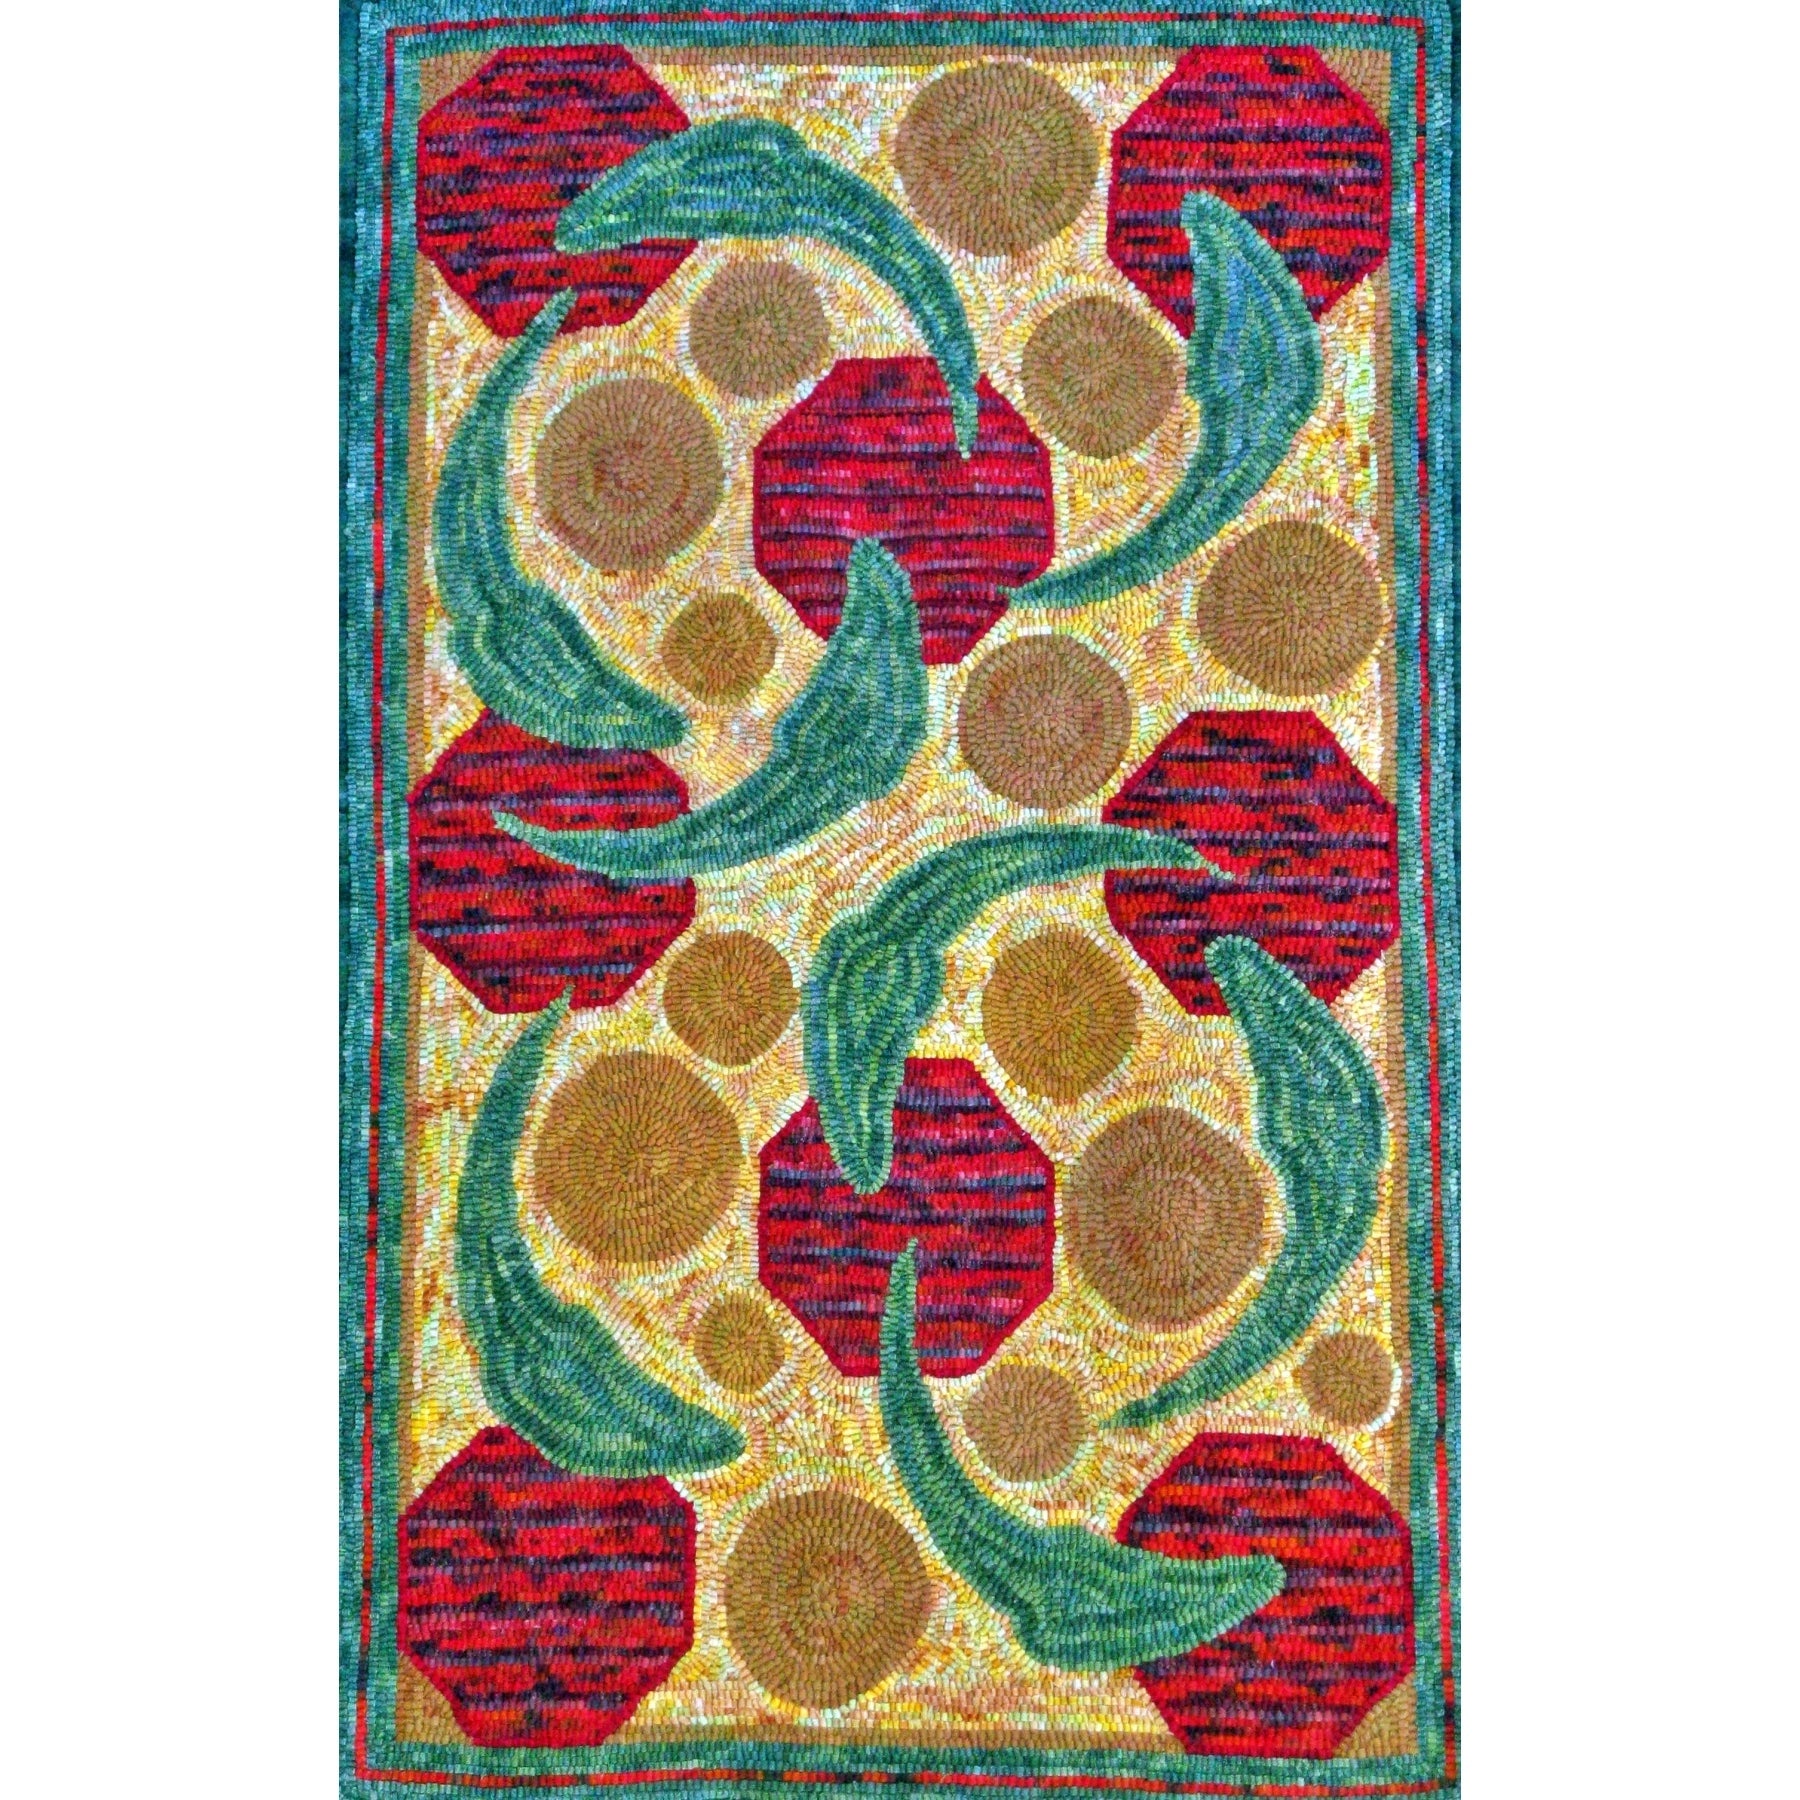 Stop and Go, rug hooked by Karen Maddox